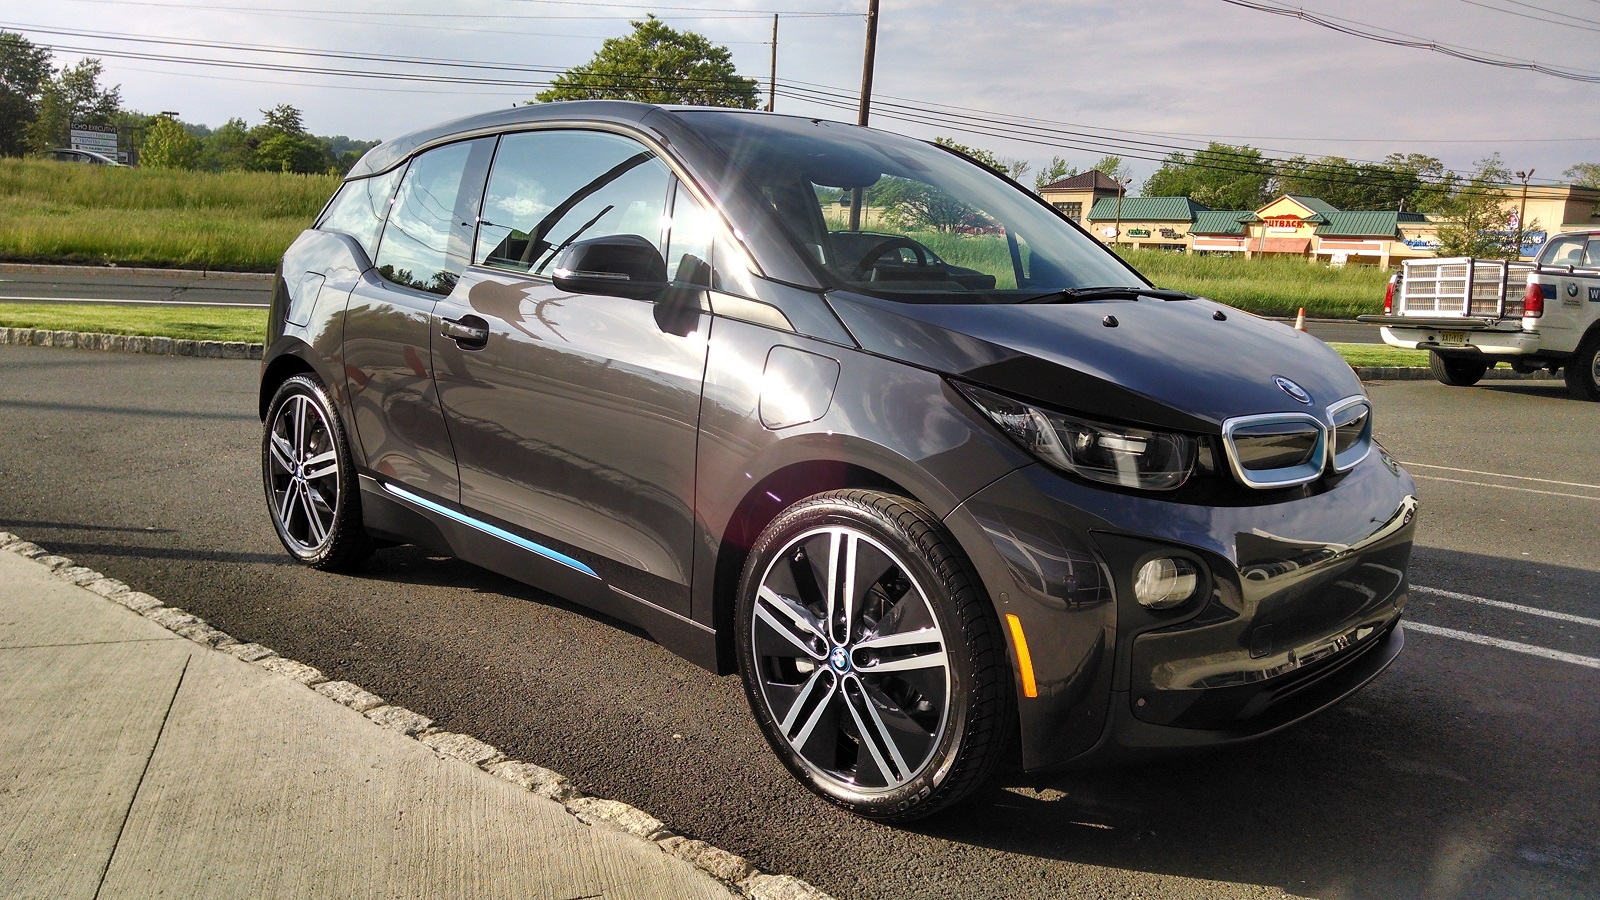 2014 BMW i3 REx range-extended electric car owned by Tom Moloughney - after delivery